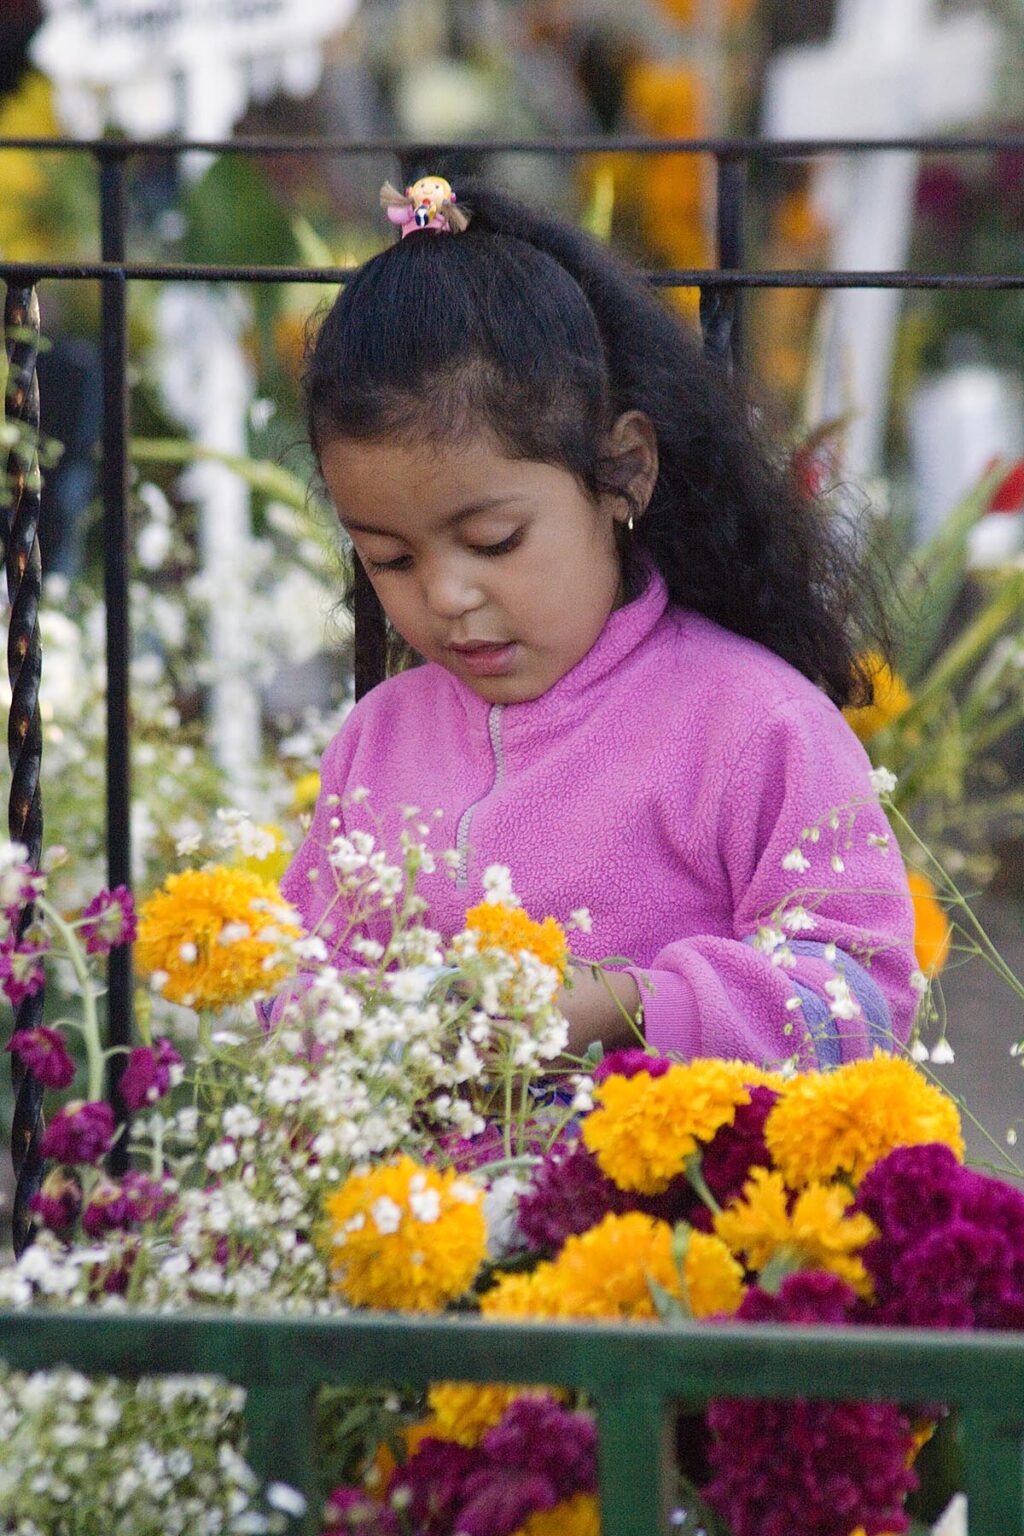 A young MEXICAN girl visits a grave during the DEAD OF THE DEAD - SAN MIGUEL DE ALLENDE, MEXICO